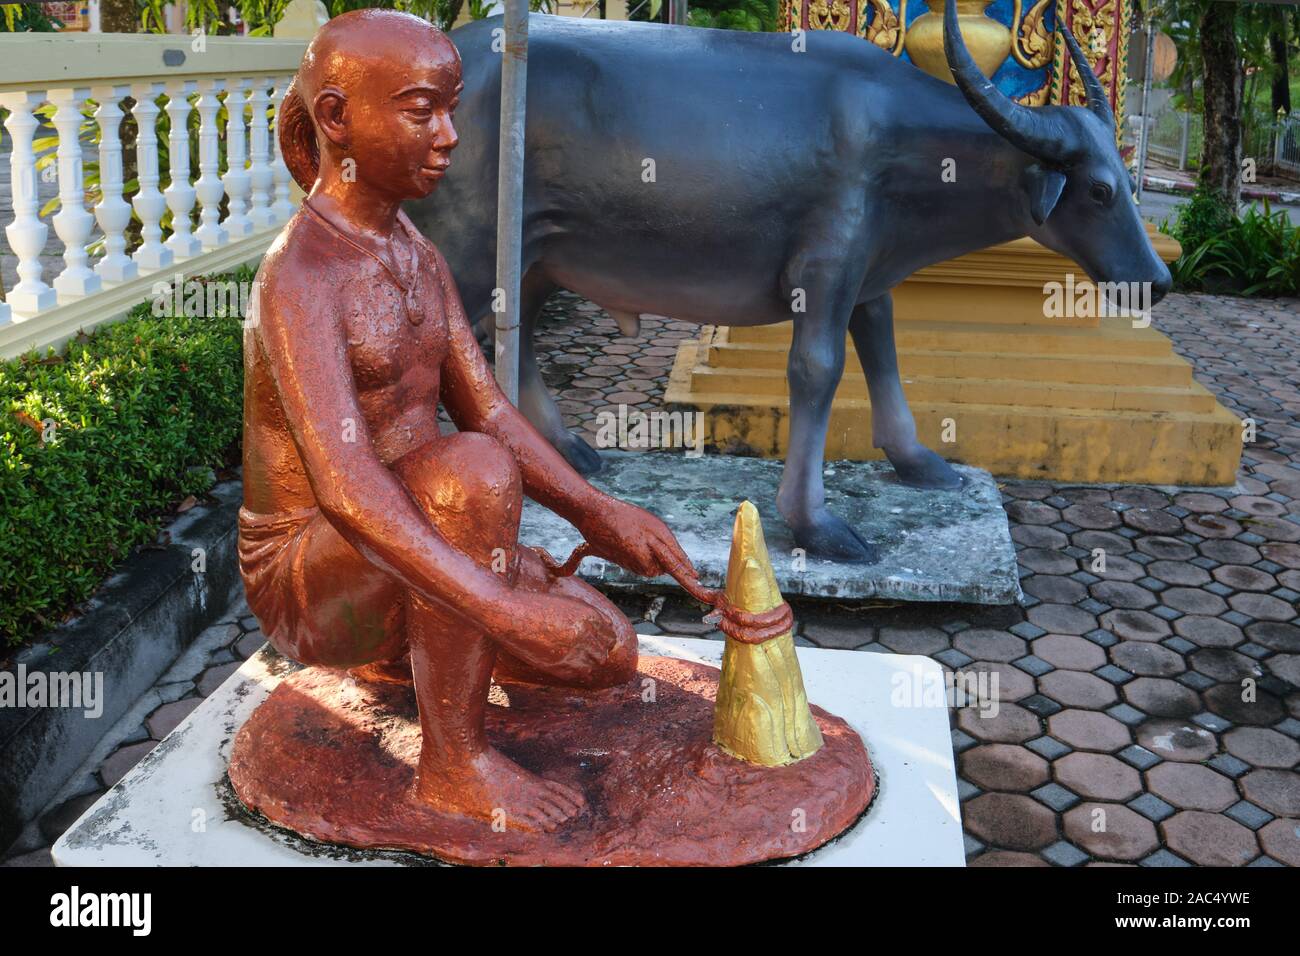 Statues at Wat Phra Thong, Thalang, Phuket, Thailand, depicting the legend surrounding the temple, a cowherd finding the temple's buried Buddha statue Stock Photo